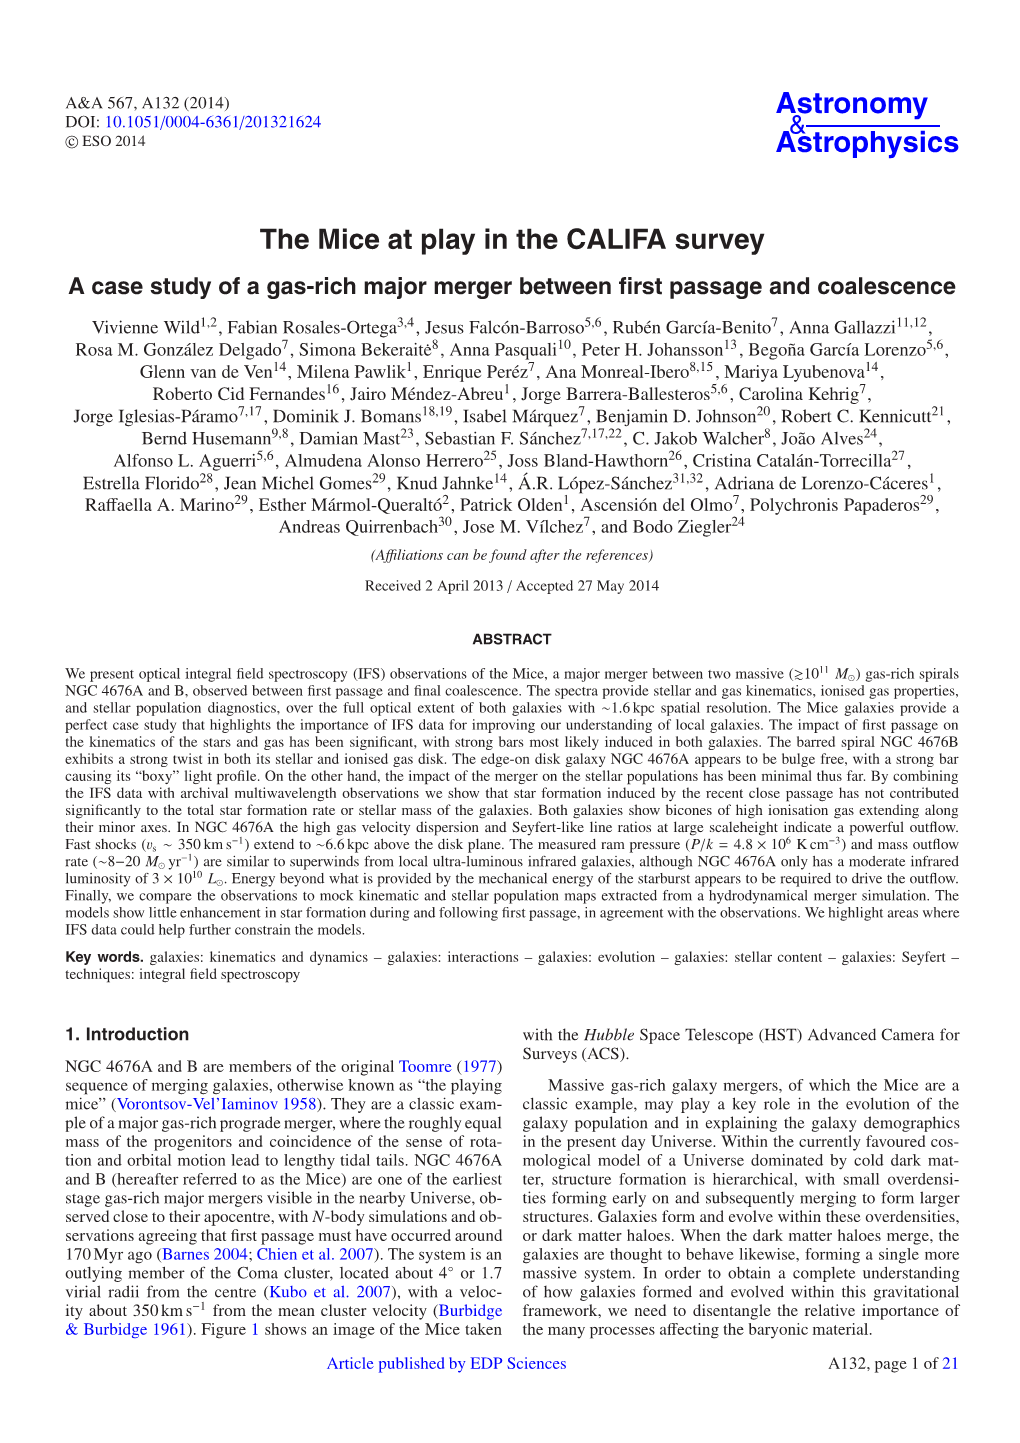 The Mice at Play in the CALIFA Survey a Case Study of a Gas-Rich Major Merger Between ﬁrst Passage and Coalescence